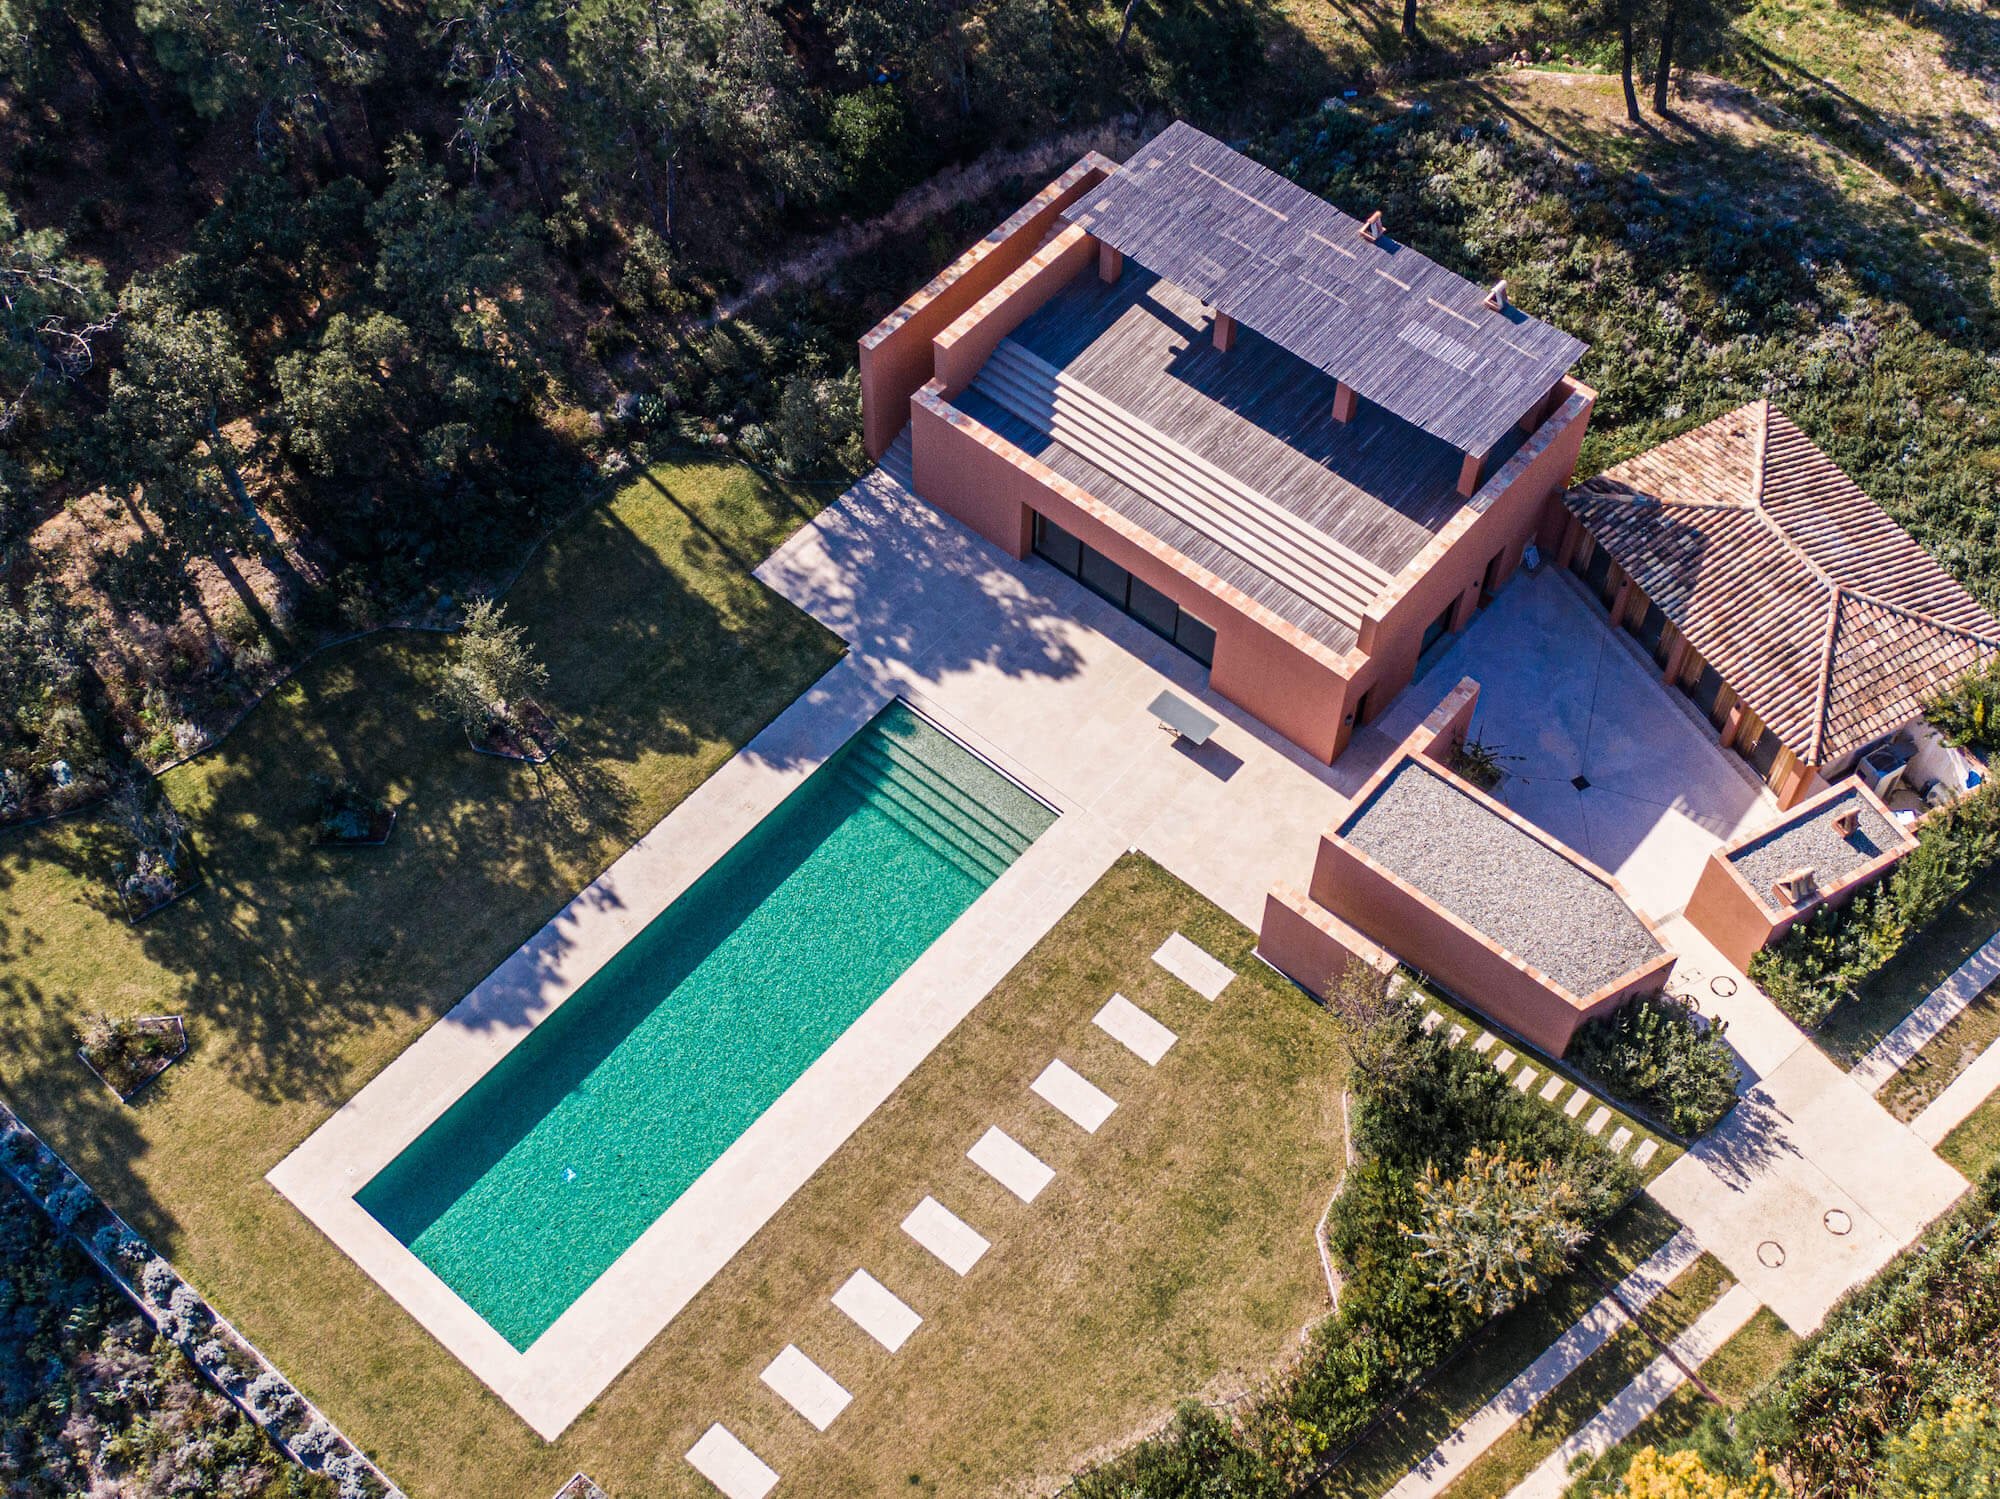 Exceptional villa for a seminar in Saint-Tropez overlooking the Mediterranean in the South of France by the sea